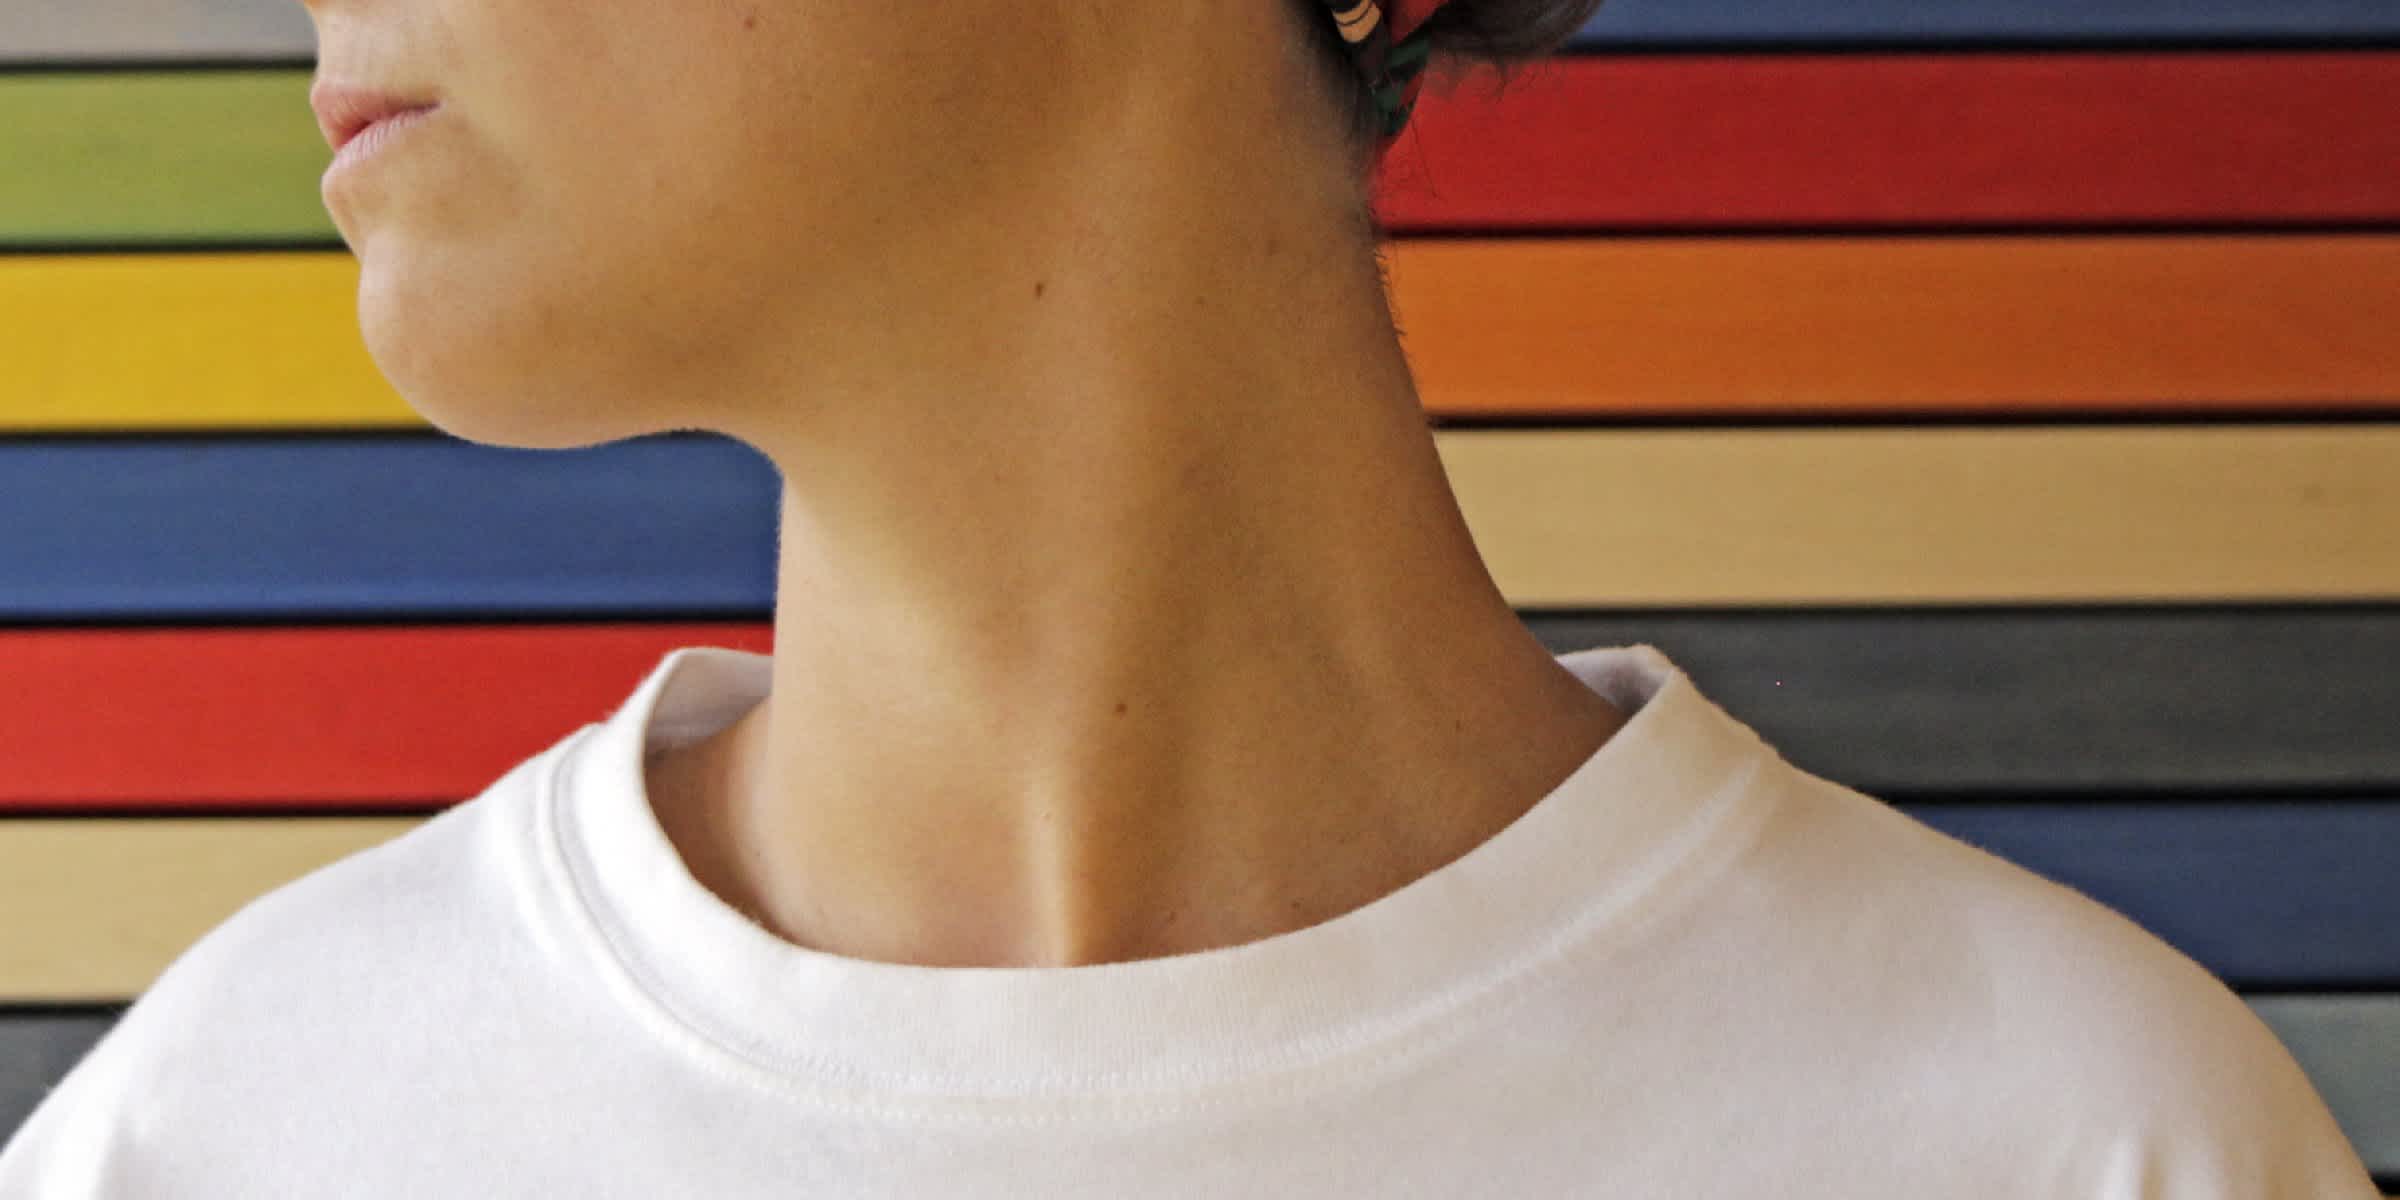 A closeup photograph of a person's neck, against a rainbow background, wearing a white t-shirt